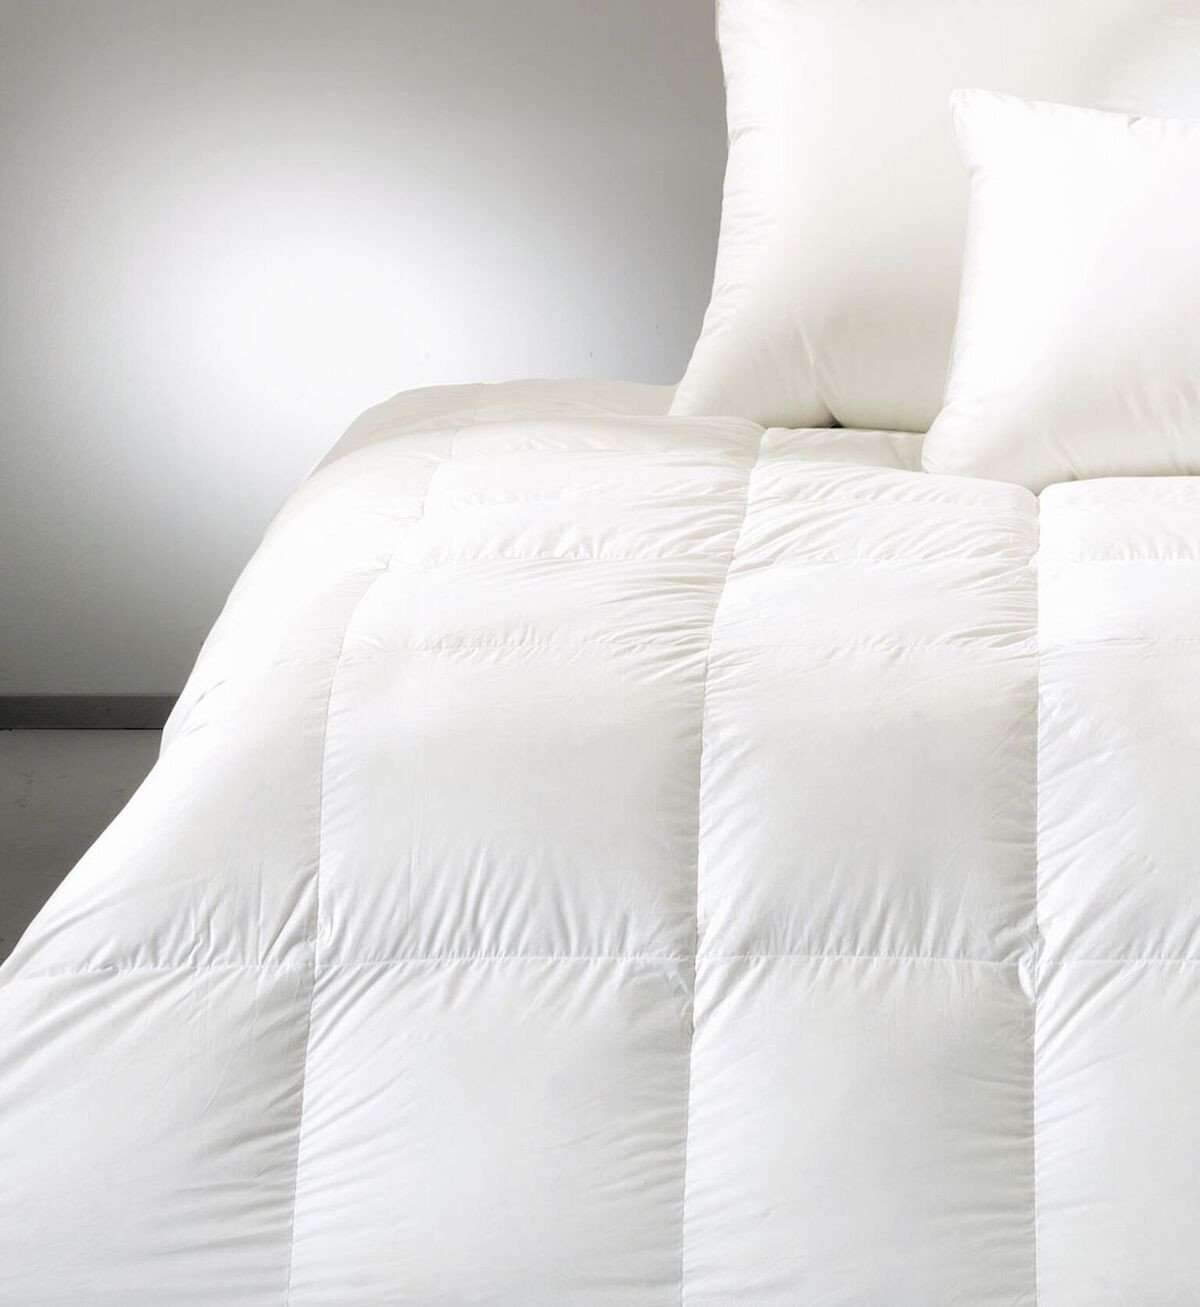 Down Comforters Down Comforter 10-inch Box by Seventh Heaven Seventh Heaven